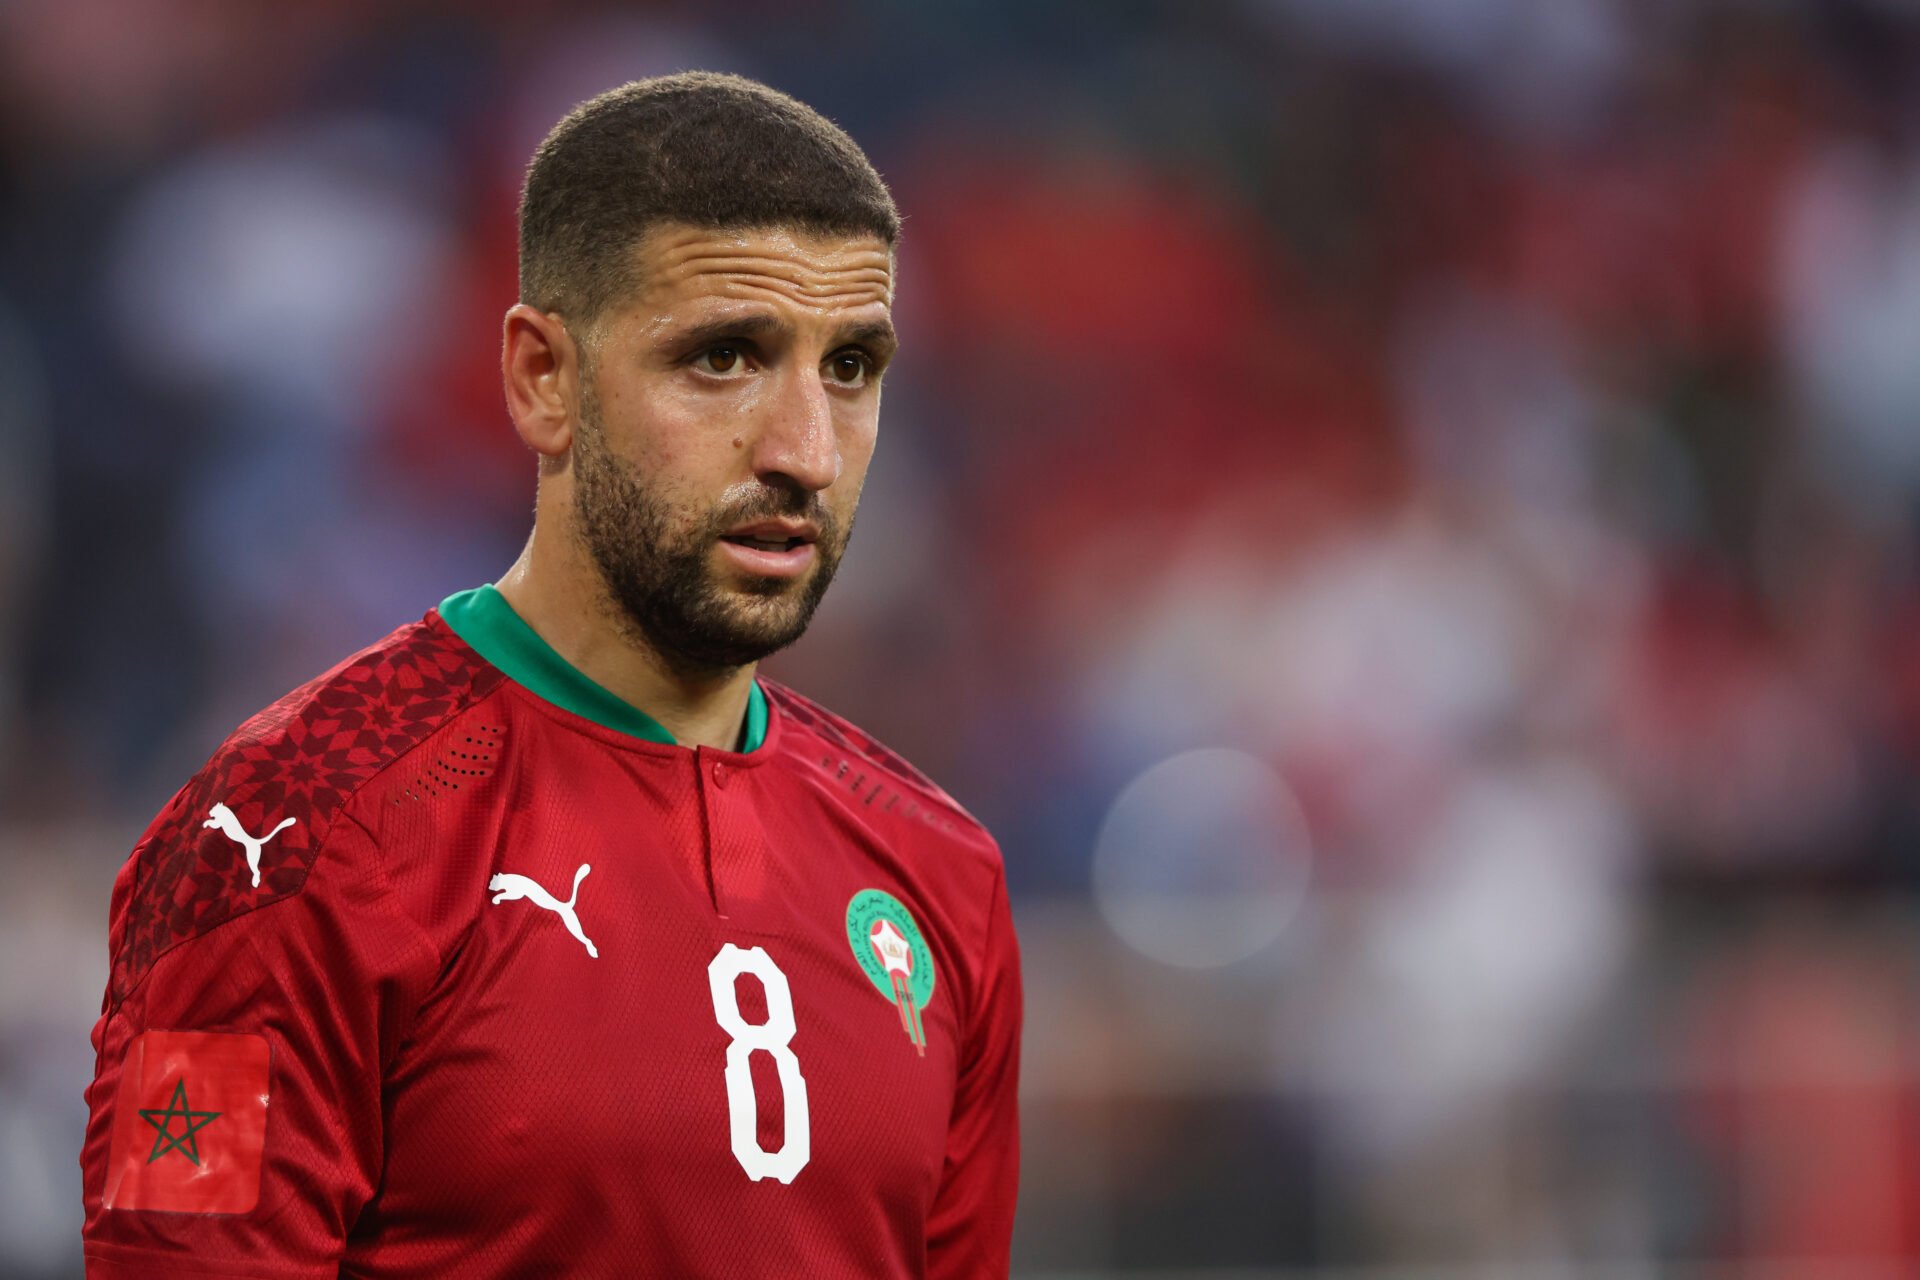 Adel Taarabt of Morocco during an international friendly between United States of America / USA and Morocco at TQL Stadium on June 1, 2022 in Cinci...